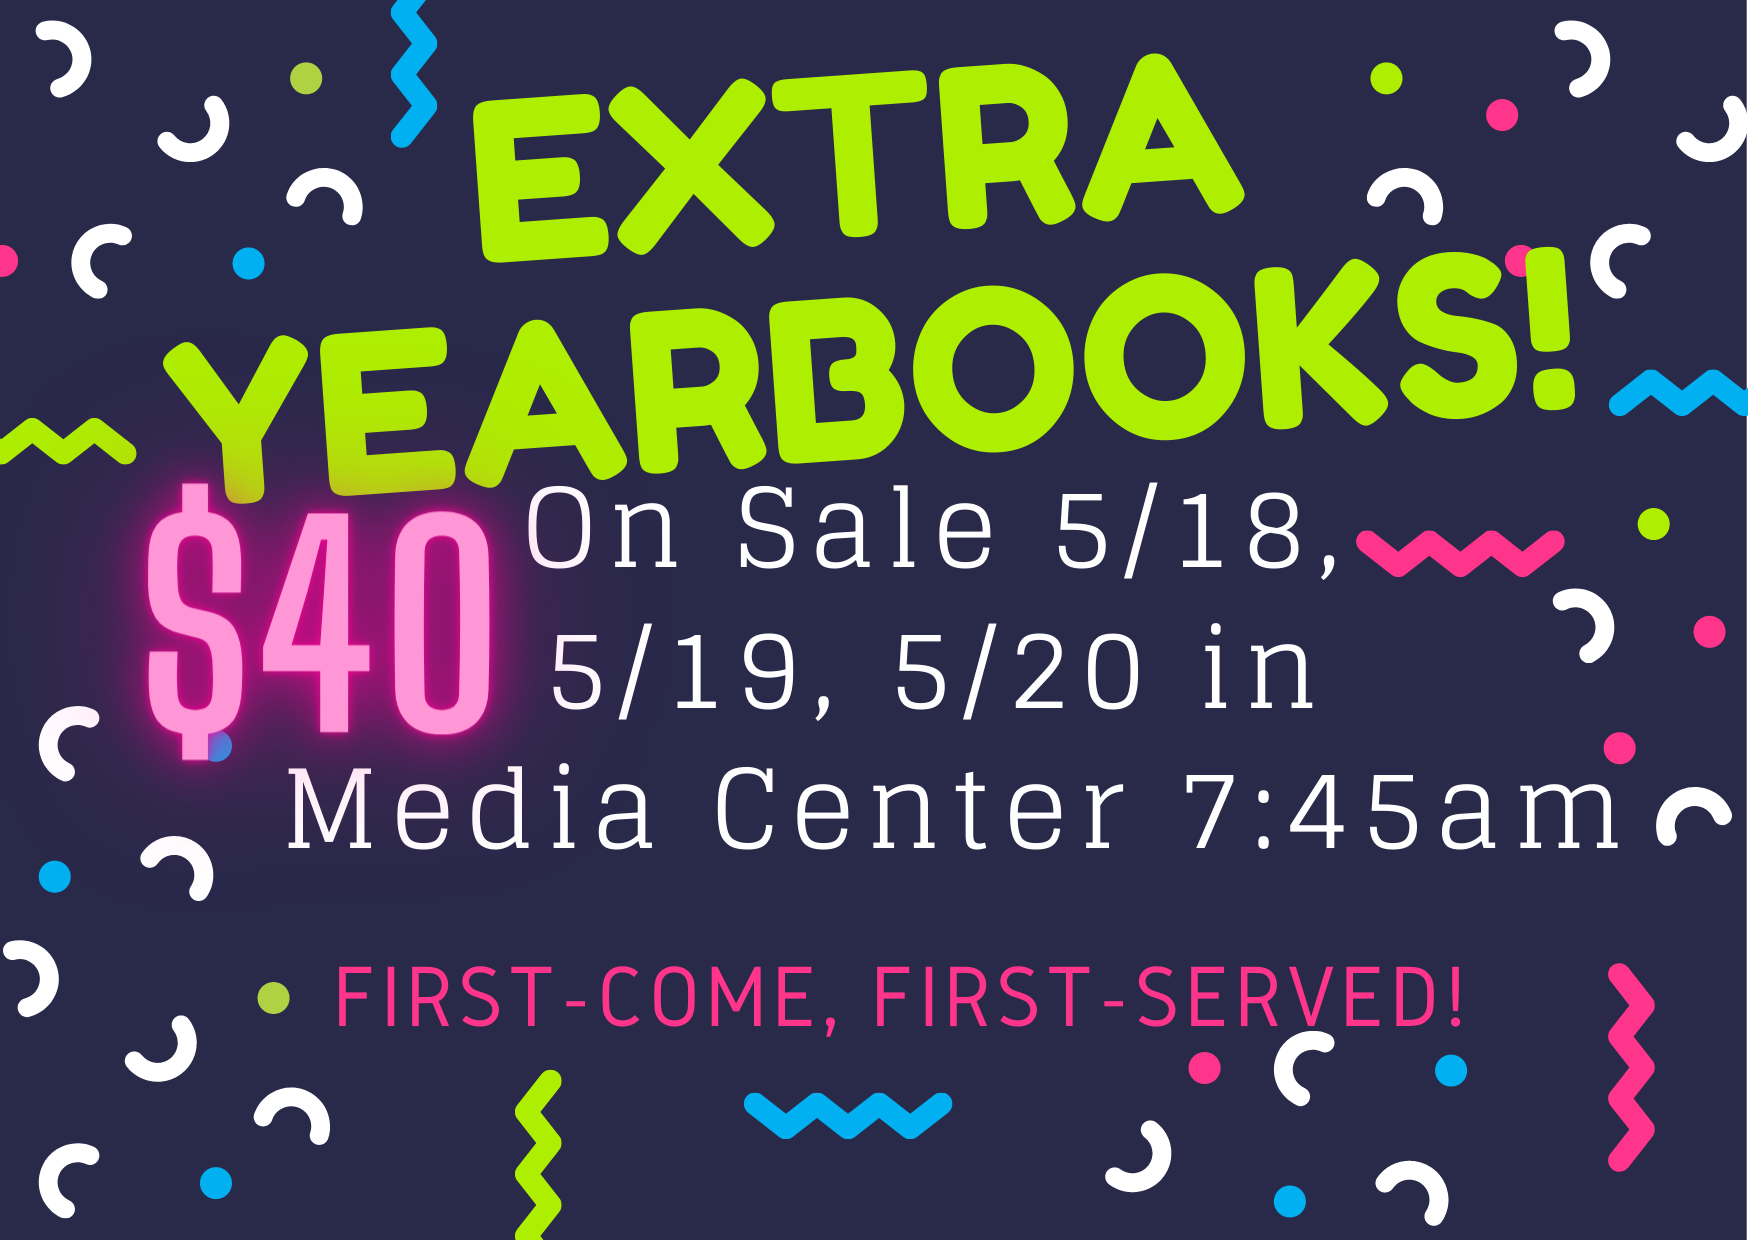 Extra Yearbook Sale 